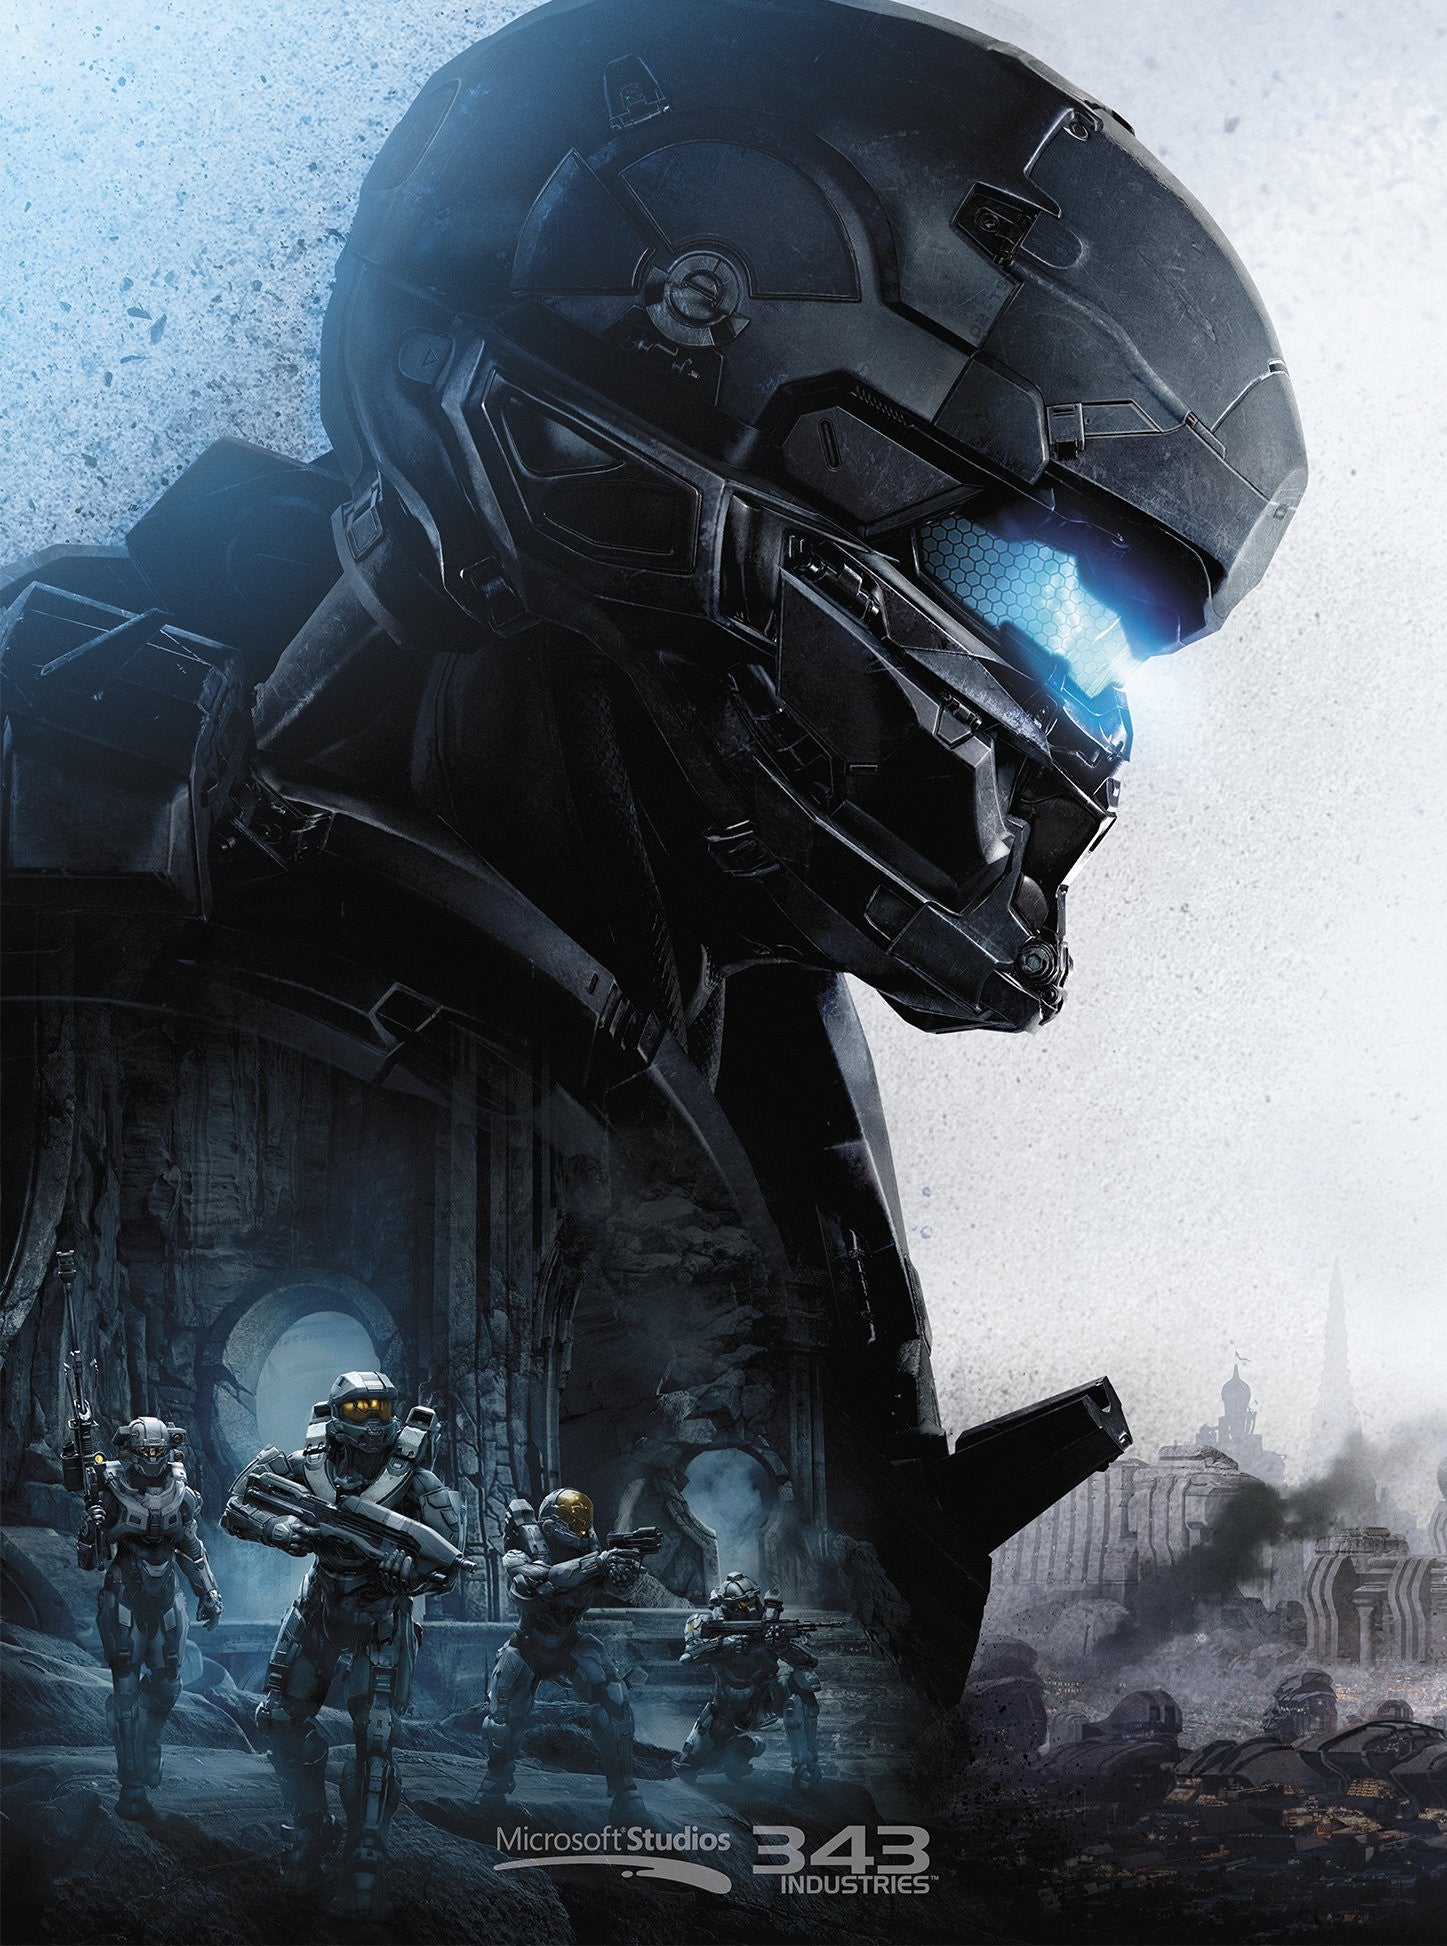 Halo 5: Guardians Collector's Edition Strategy Guide: Prima Official Game Guide Hardcover